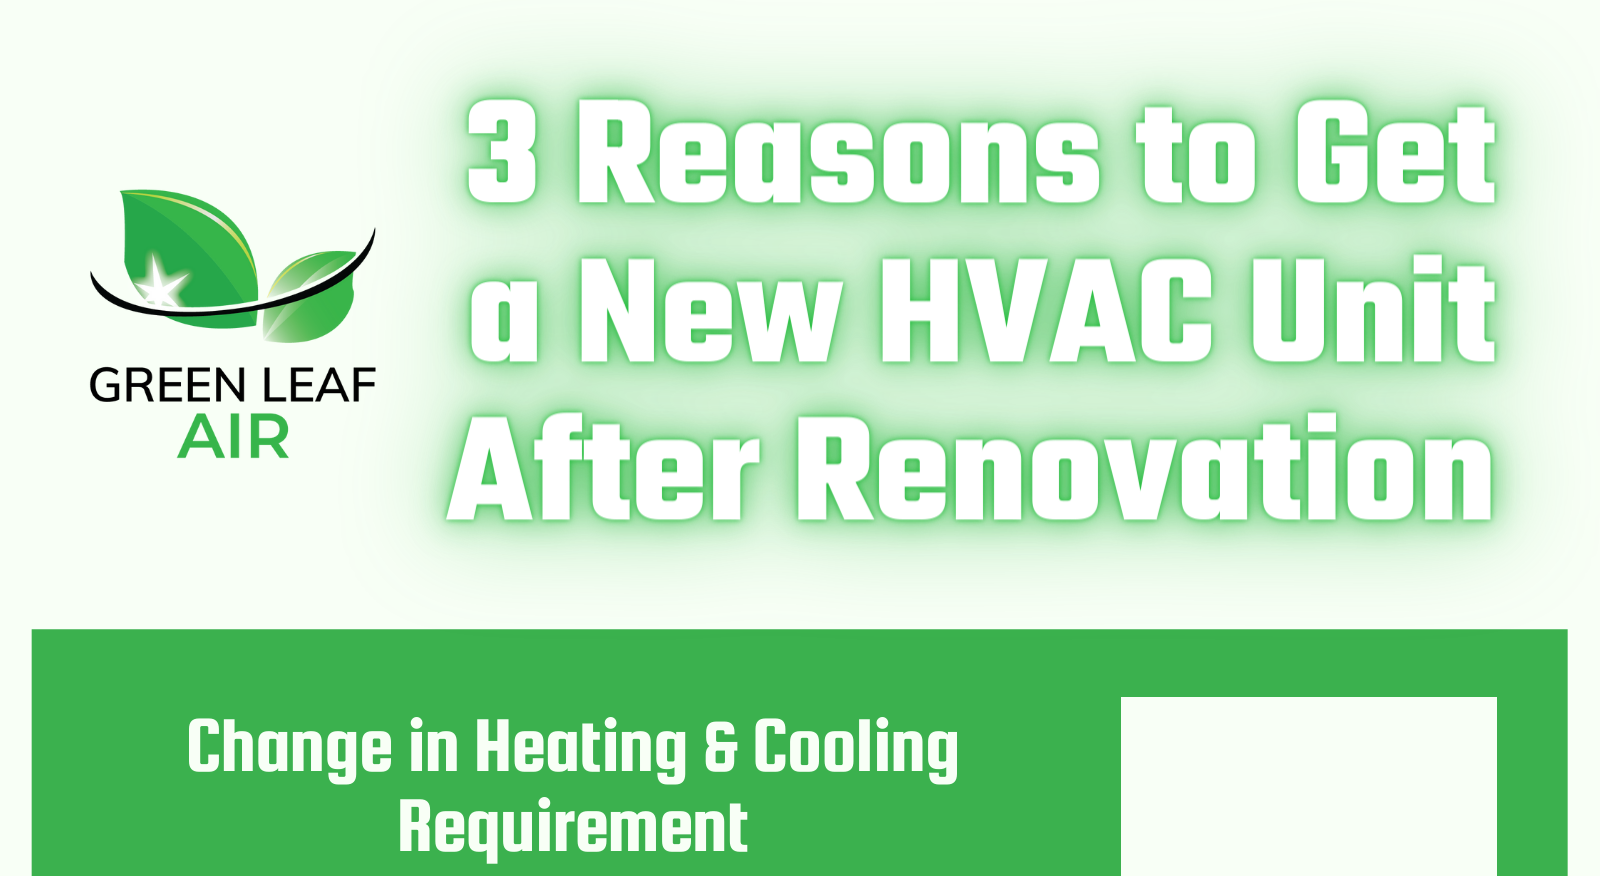 3 Reasons to Get a New HVAC Unit After Renovation